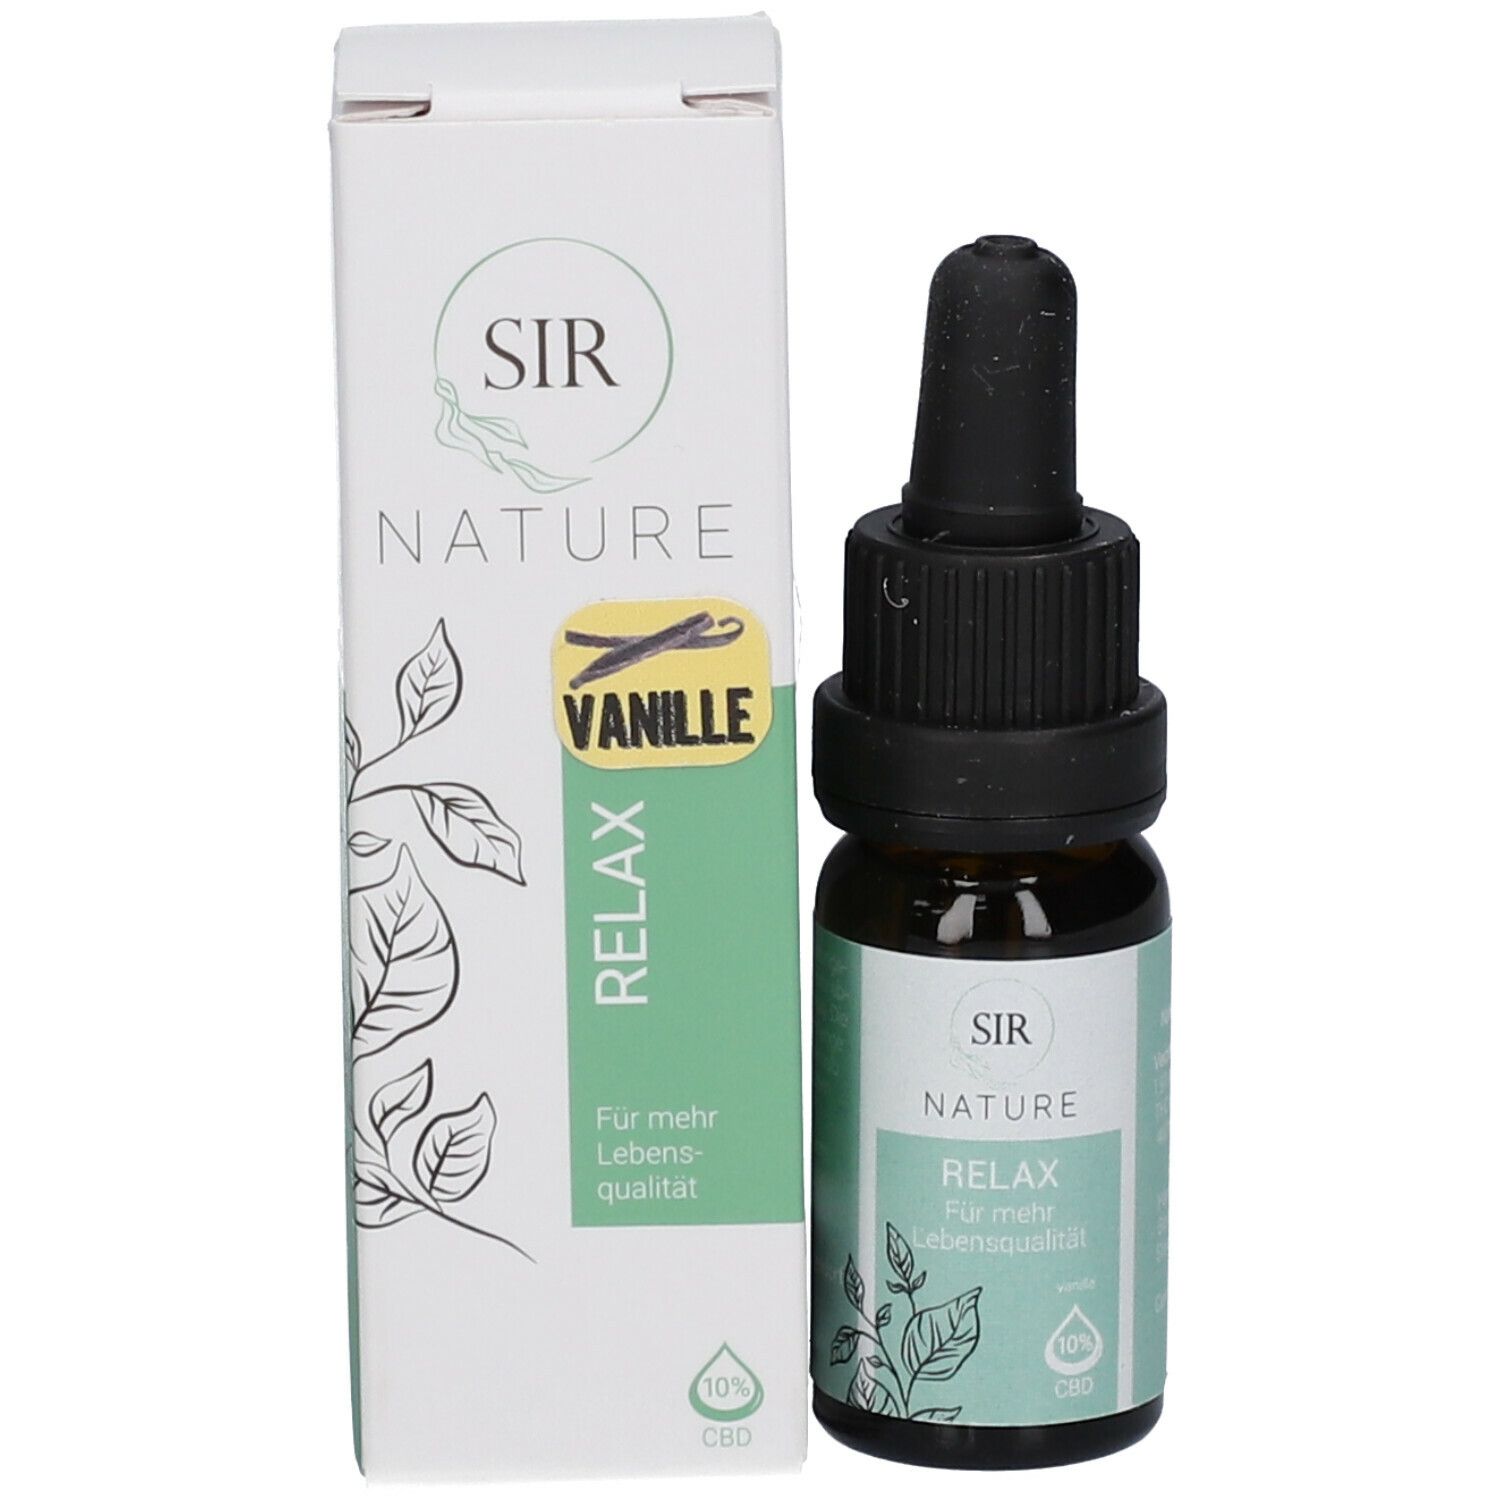 SIR NATURE Relax Vanille 10 %